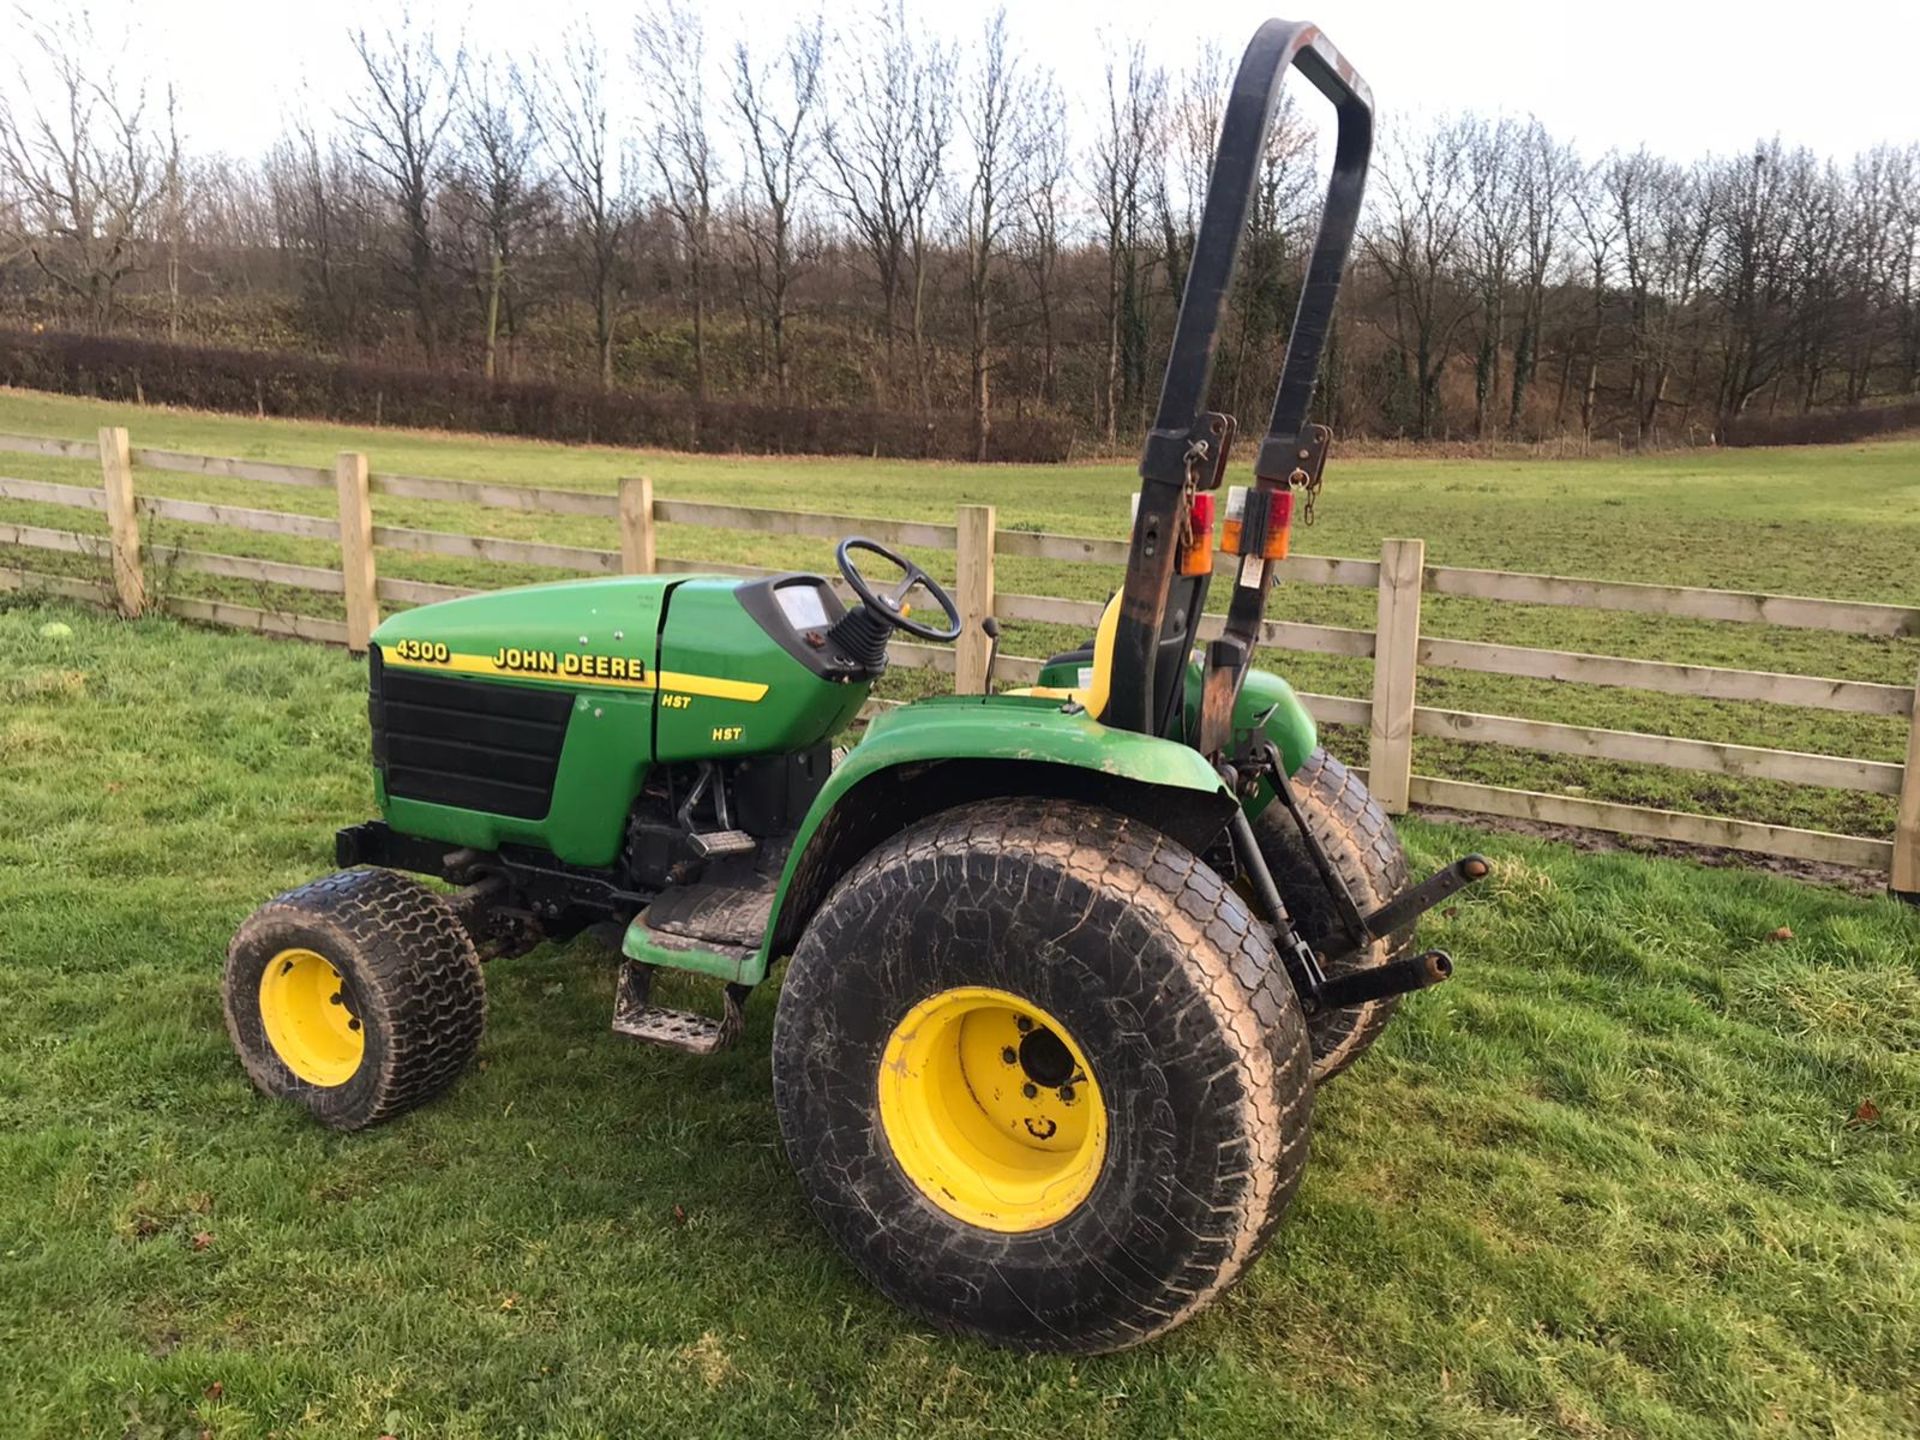 JOHN DEERE 4300 HST COMPACT TRACTOR 4WD, EX-COUNCIL, FIRST REG IN 2002 TO SOUTHERN DISTRICT COUNCIL